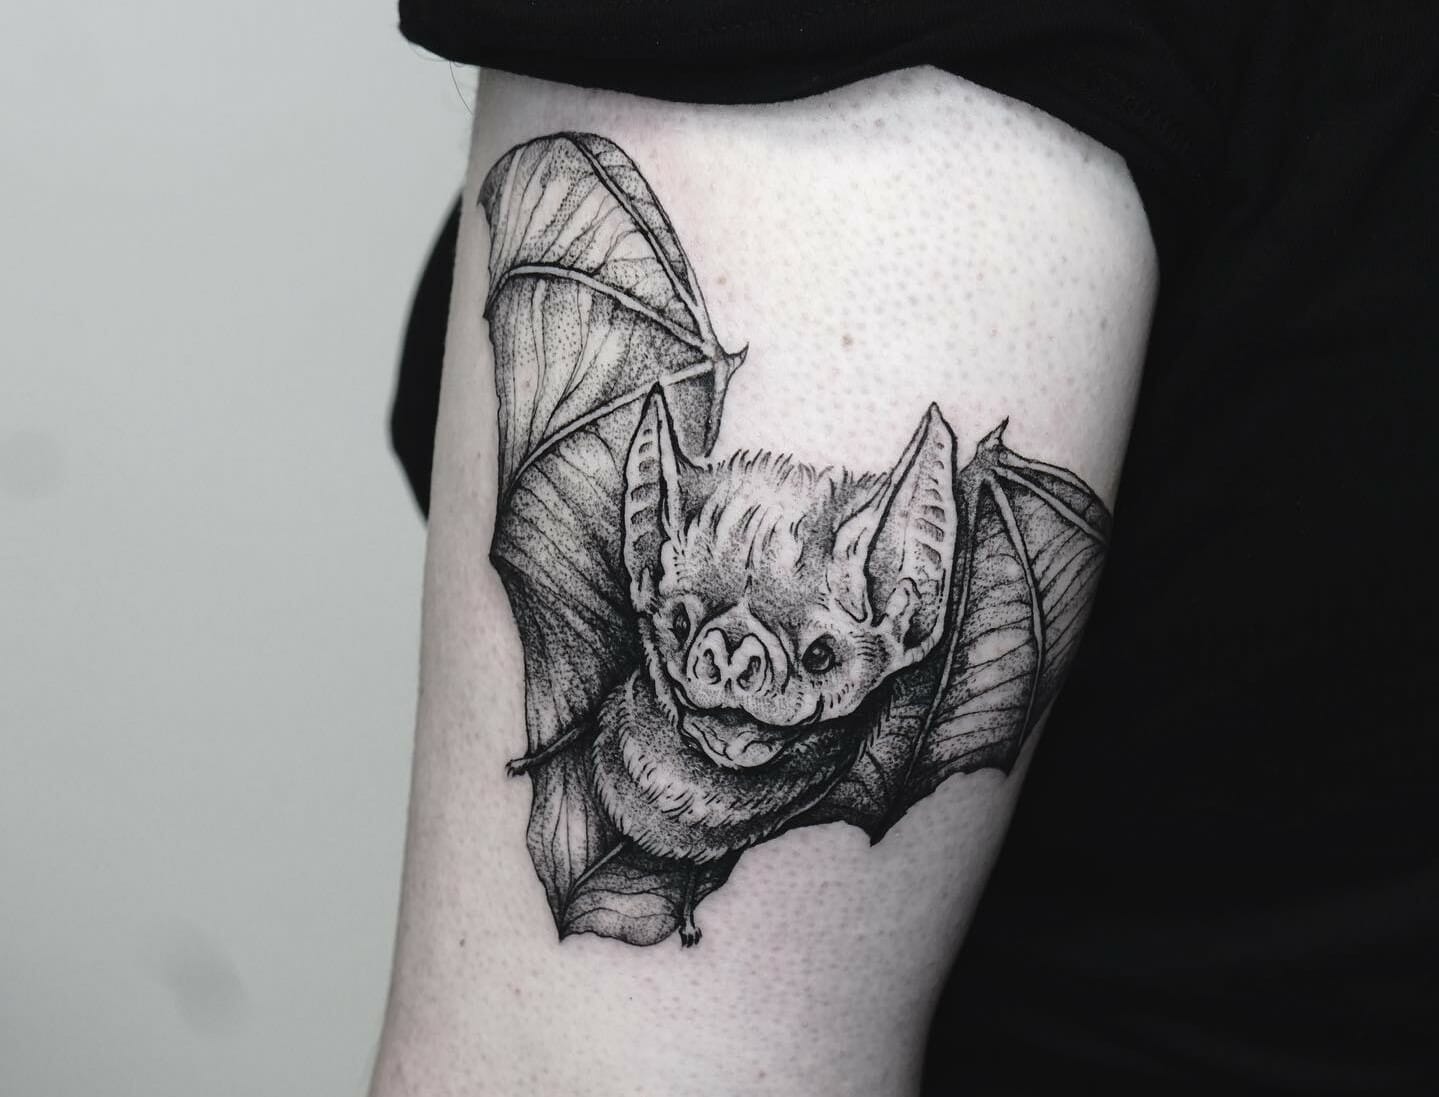 101 Best Vampire Bat Tattoo Ideas That Will Blow Your Mind! - Outsons